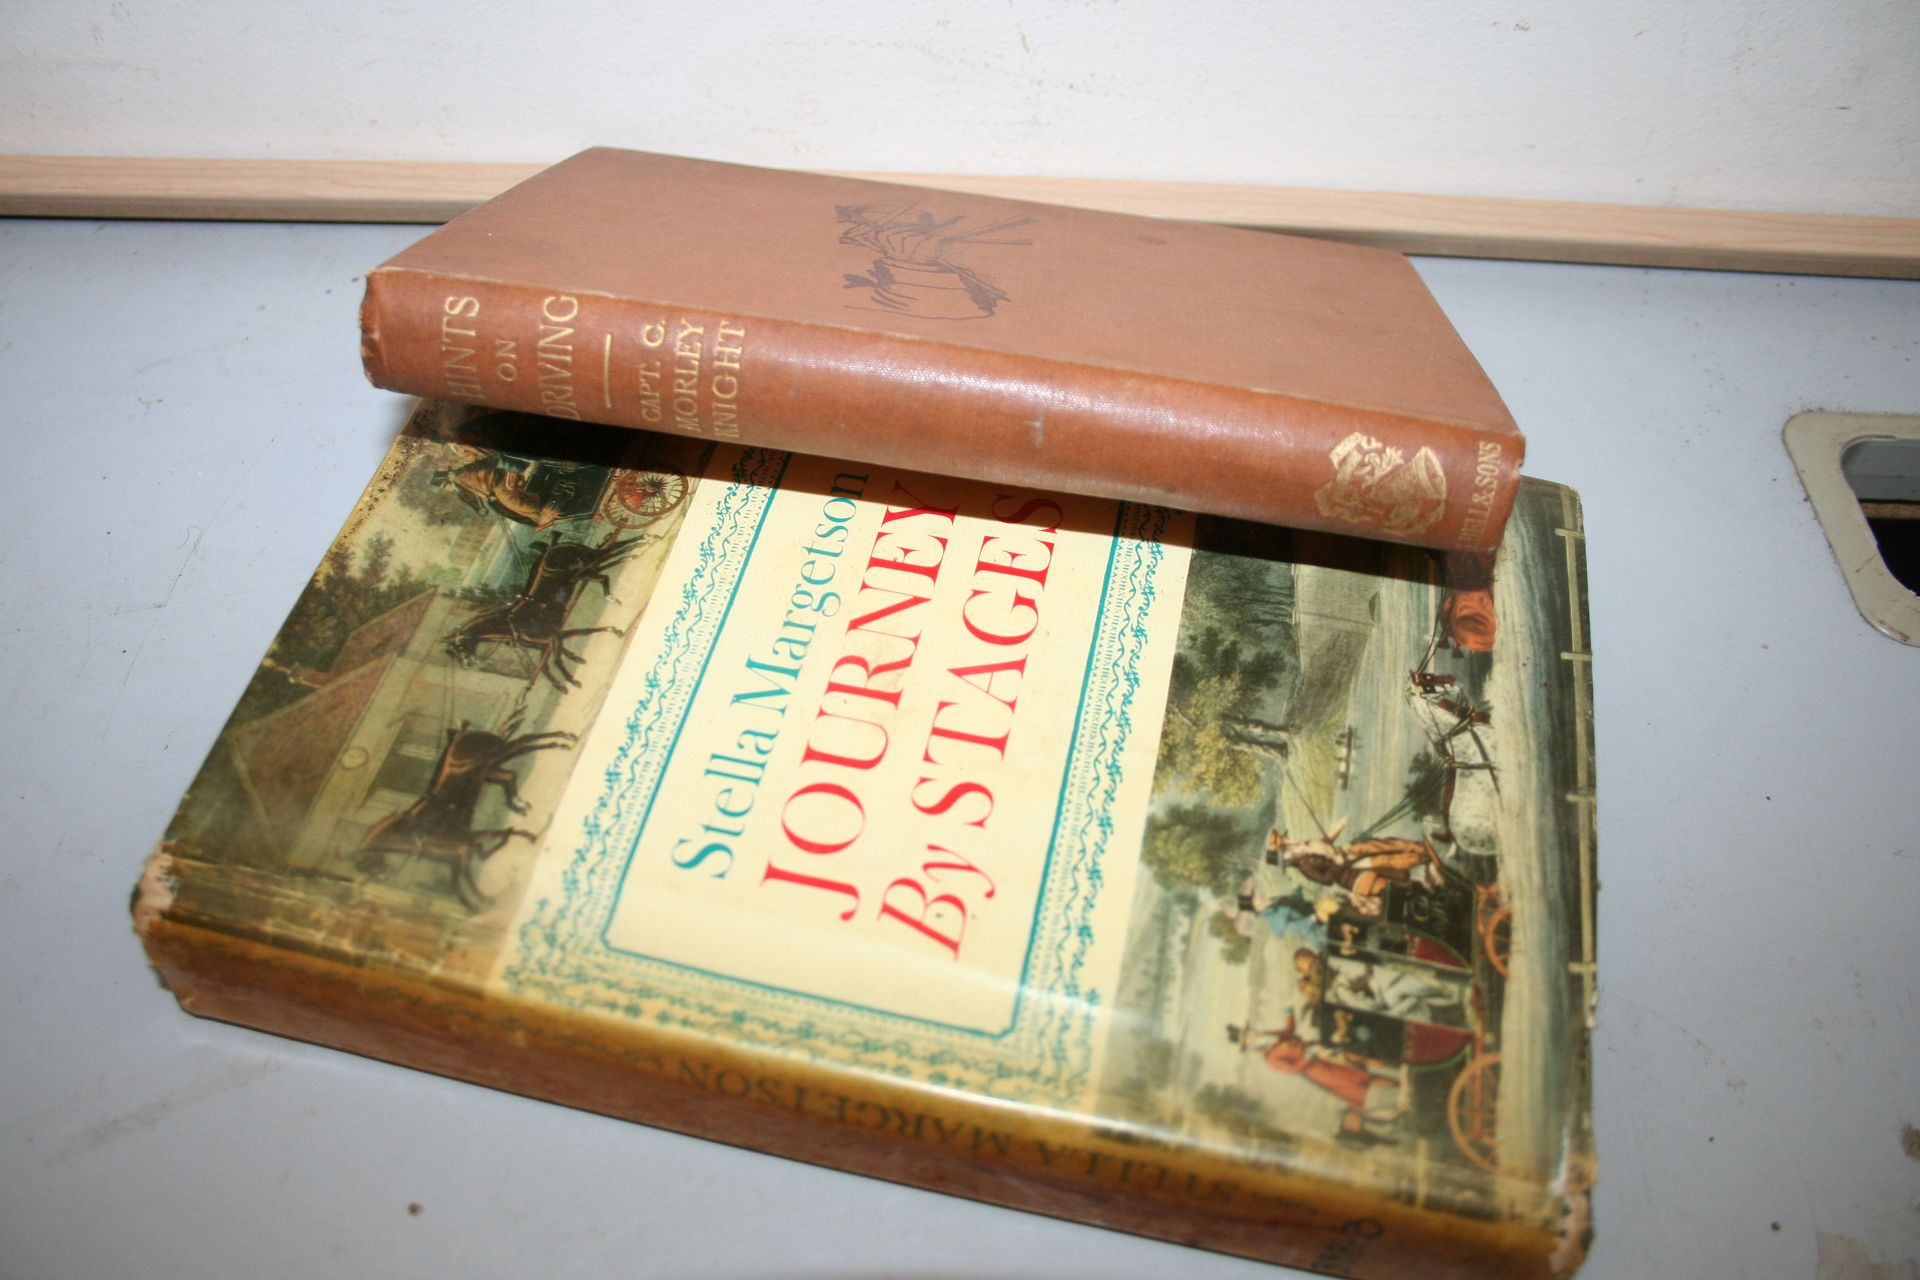 Hints on Driving by Morley Knight 1905 together with Journey by Stages 1965